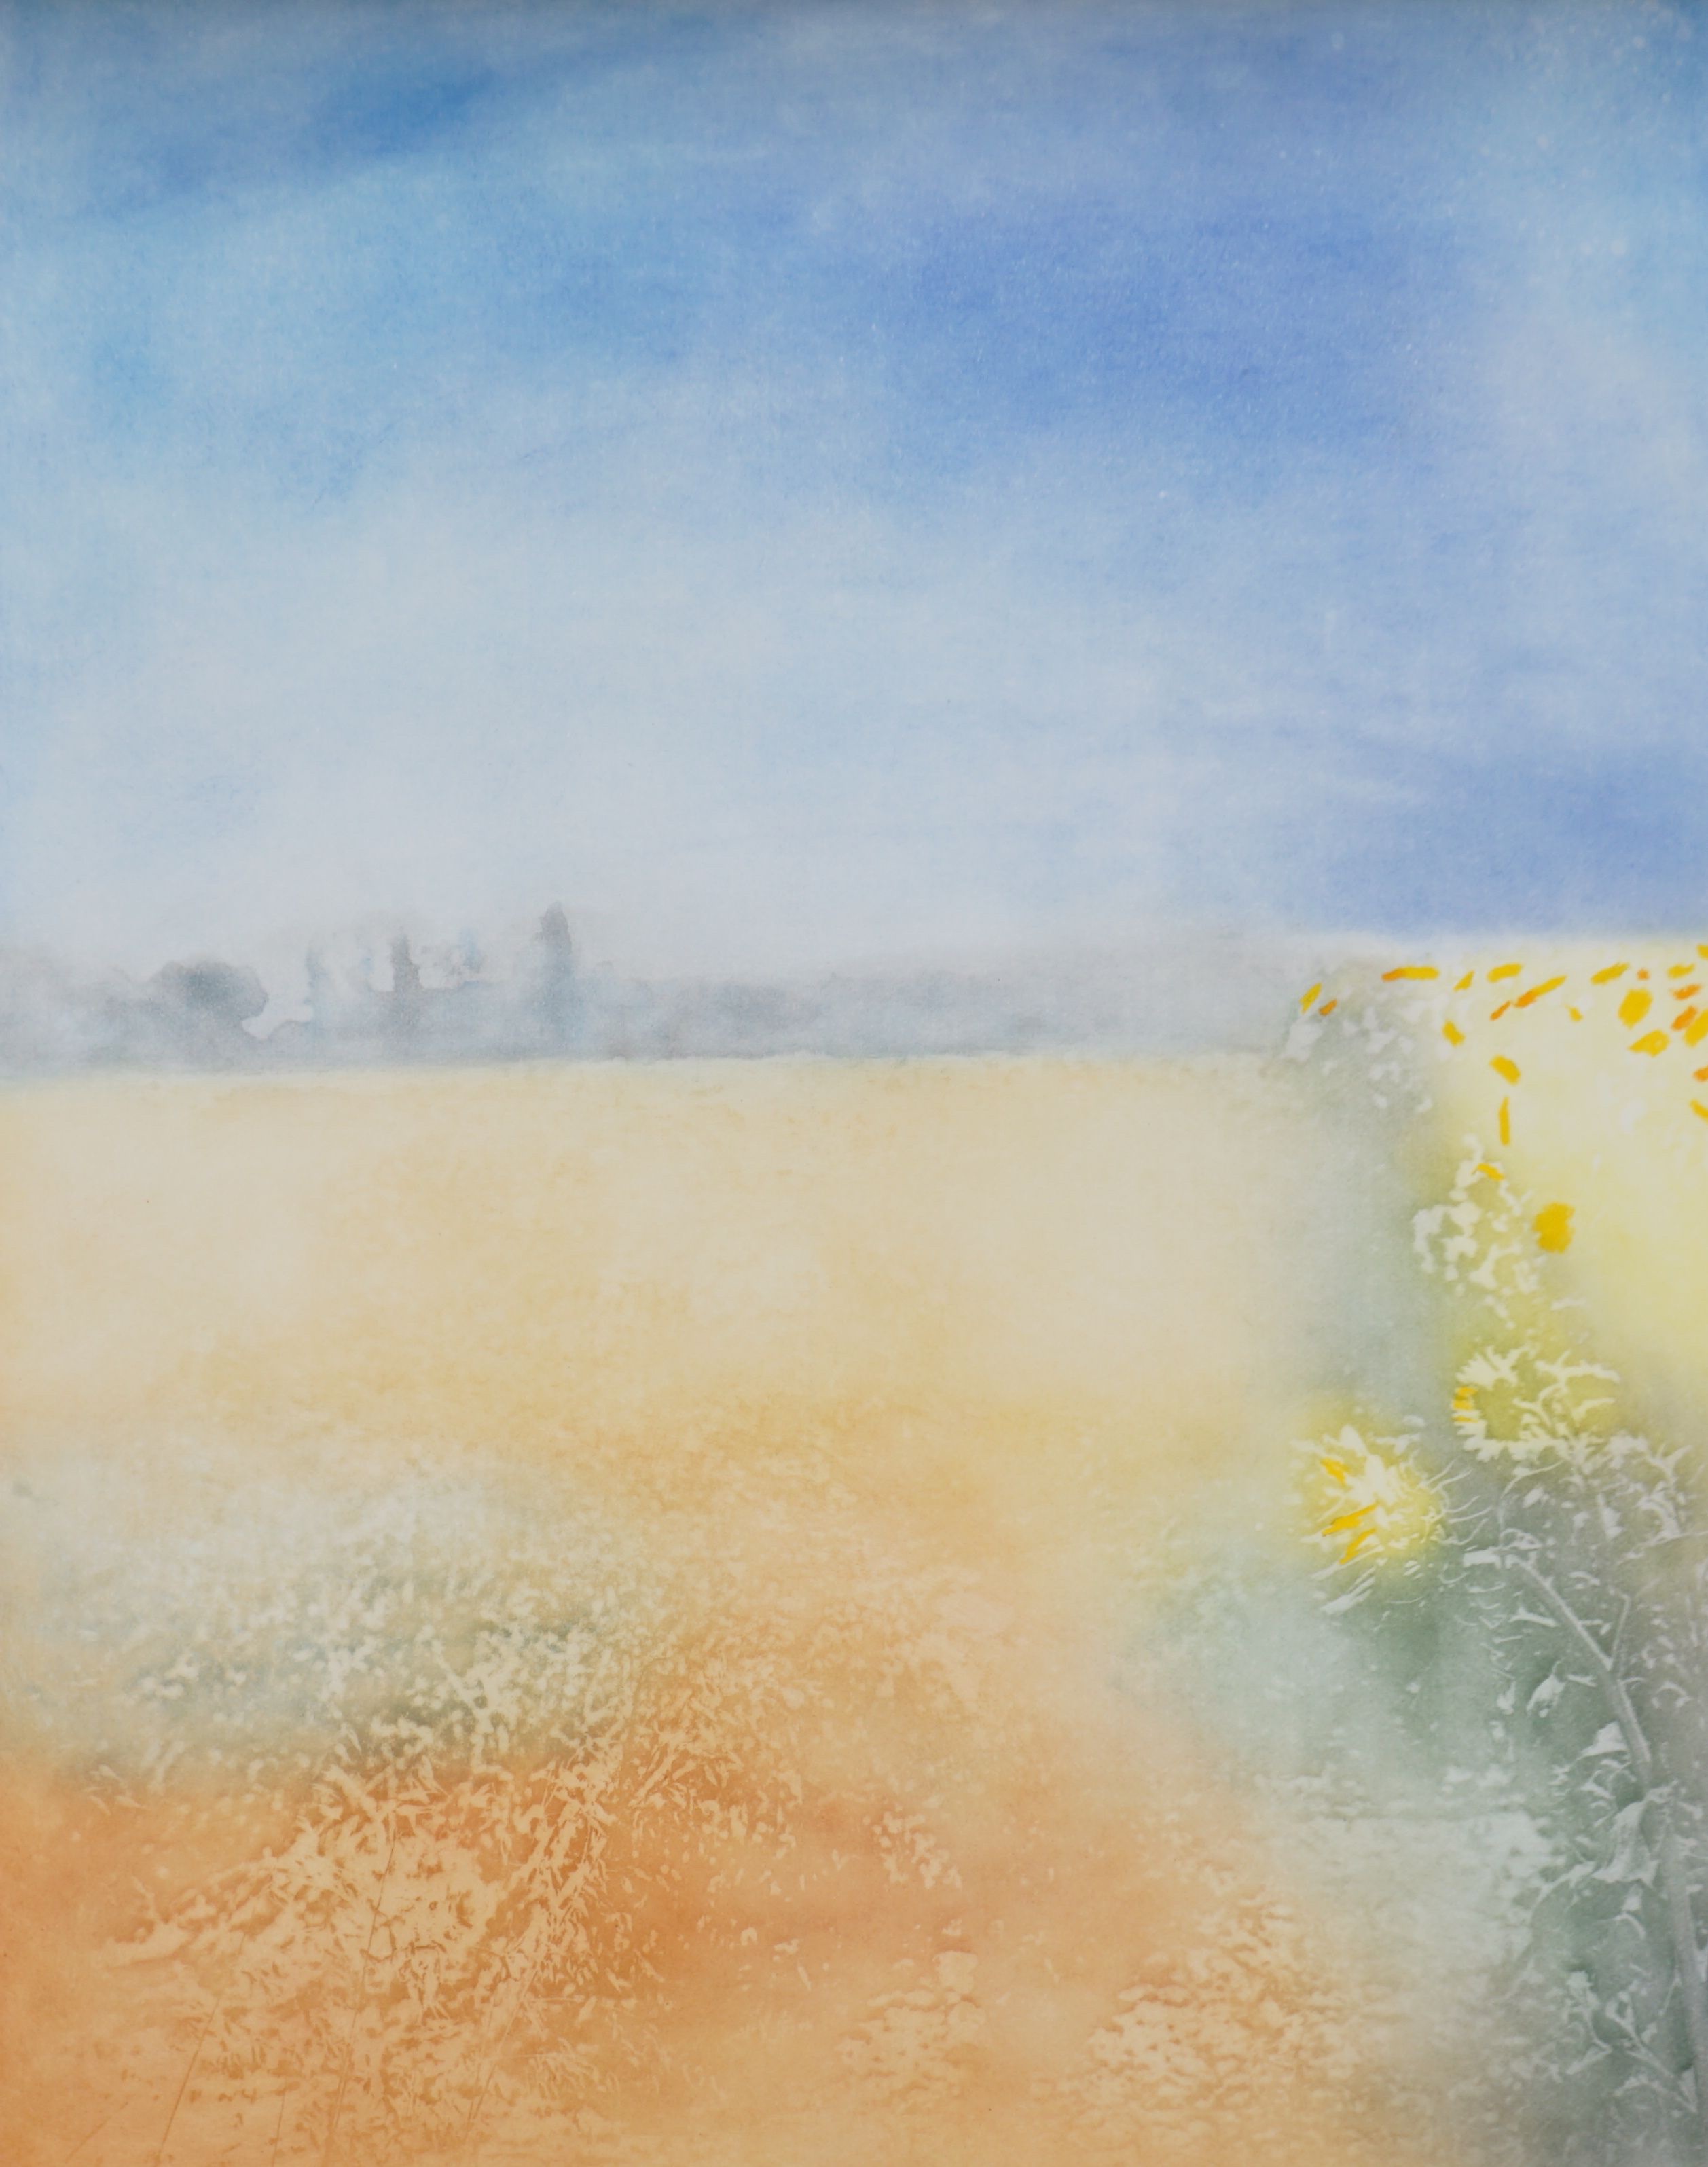 Donald Wilkinson (1937-), limited edition printed triptych, 'Fields near Orange Provencal', signed, 4/80, each sheet 74 x 56cm, unframed